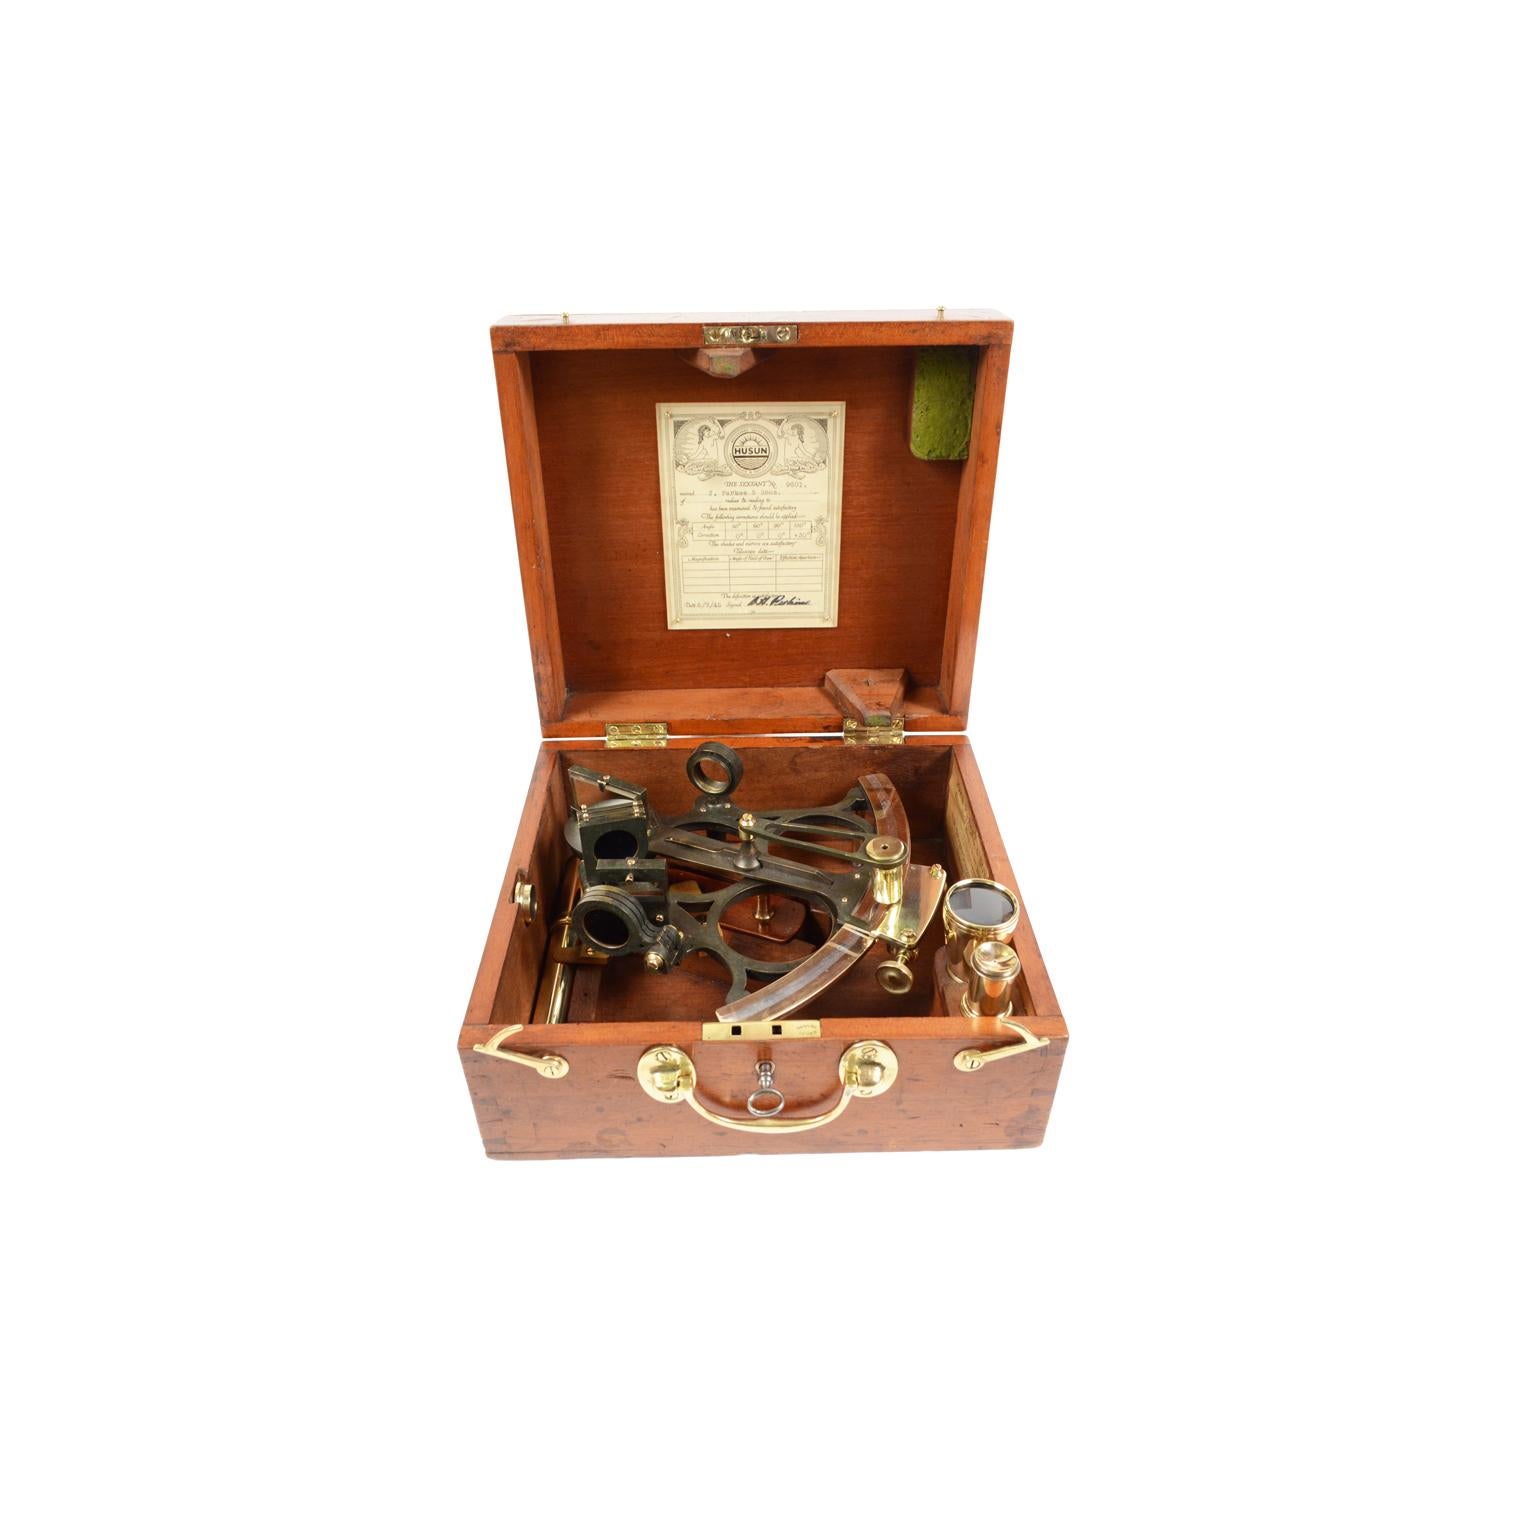 British Brass Sextant Early 1900s Made in Liverpool with Original Oak Wood Box